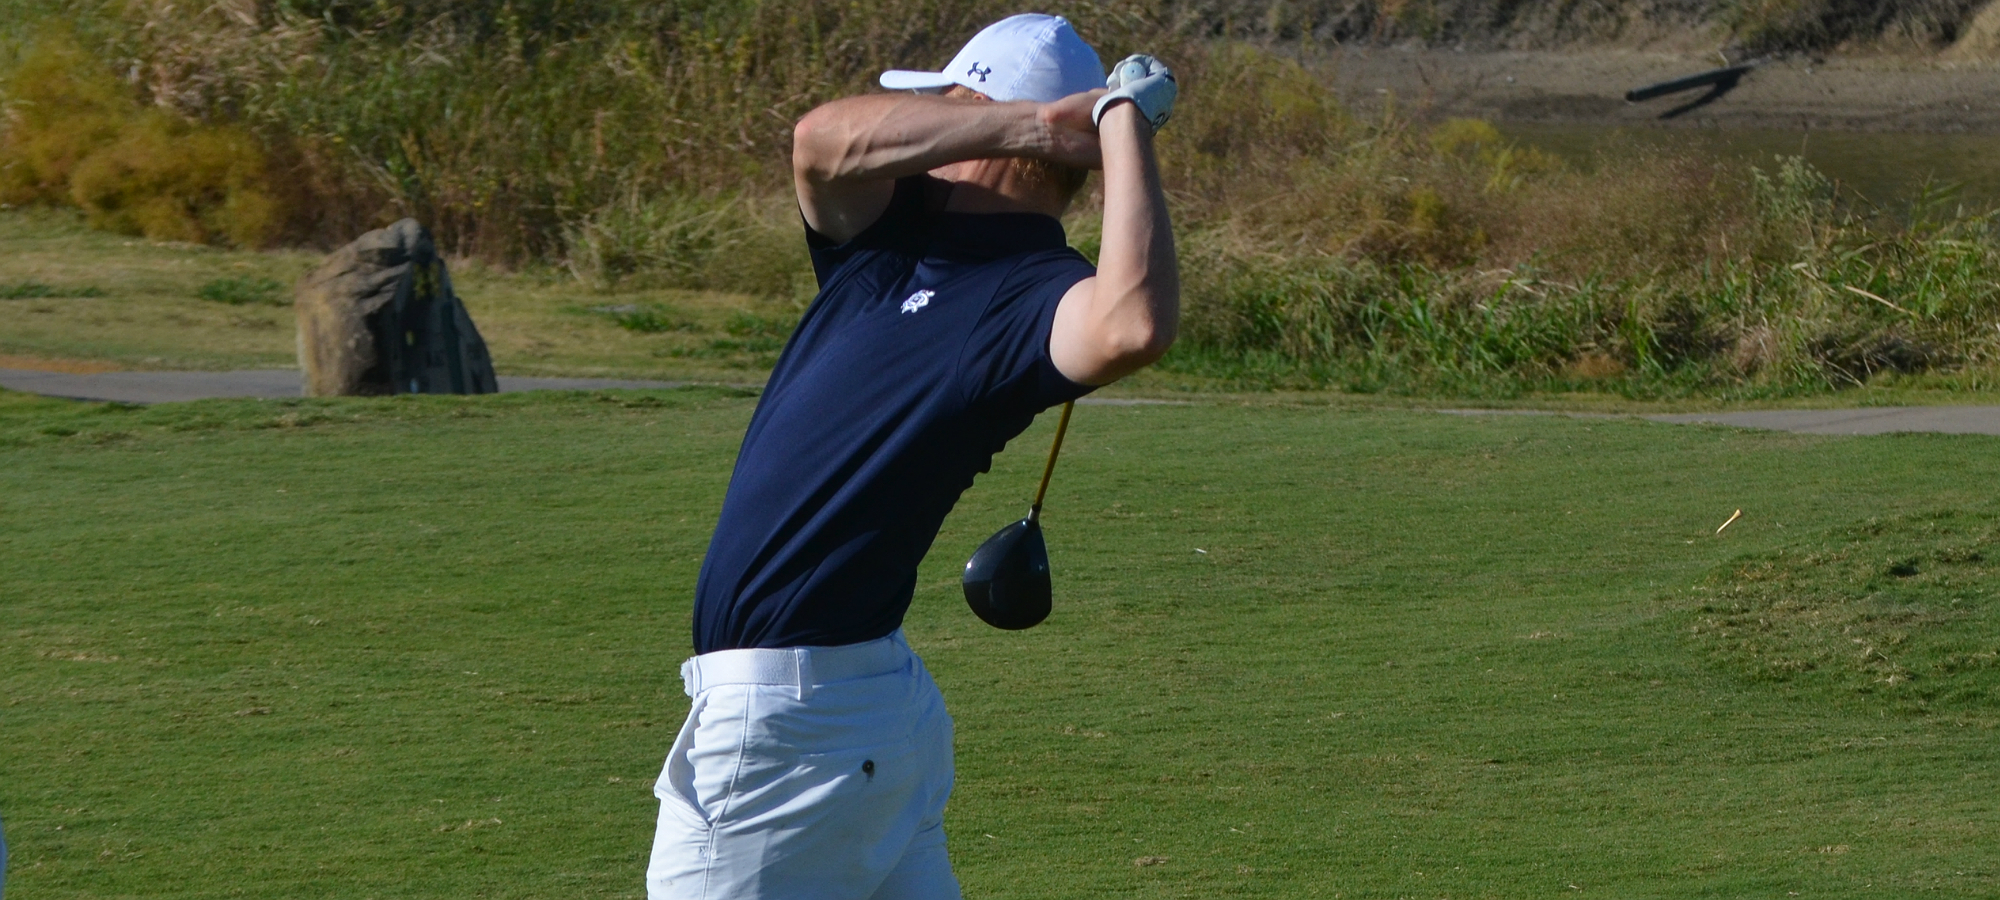 Golf in 7th after First Round of Texas Cup